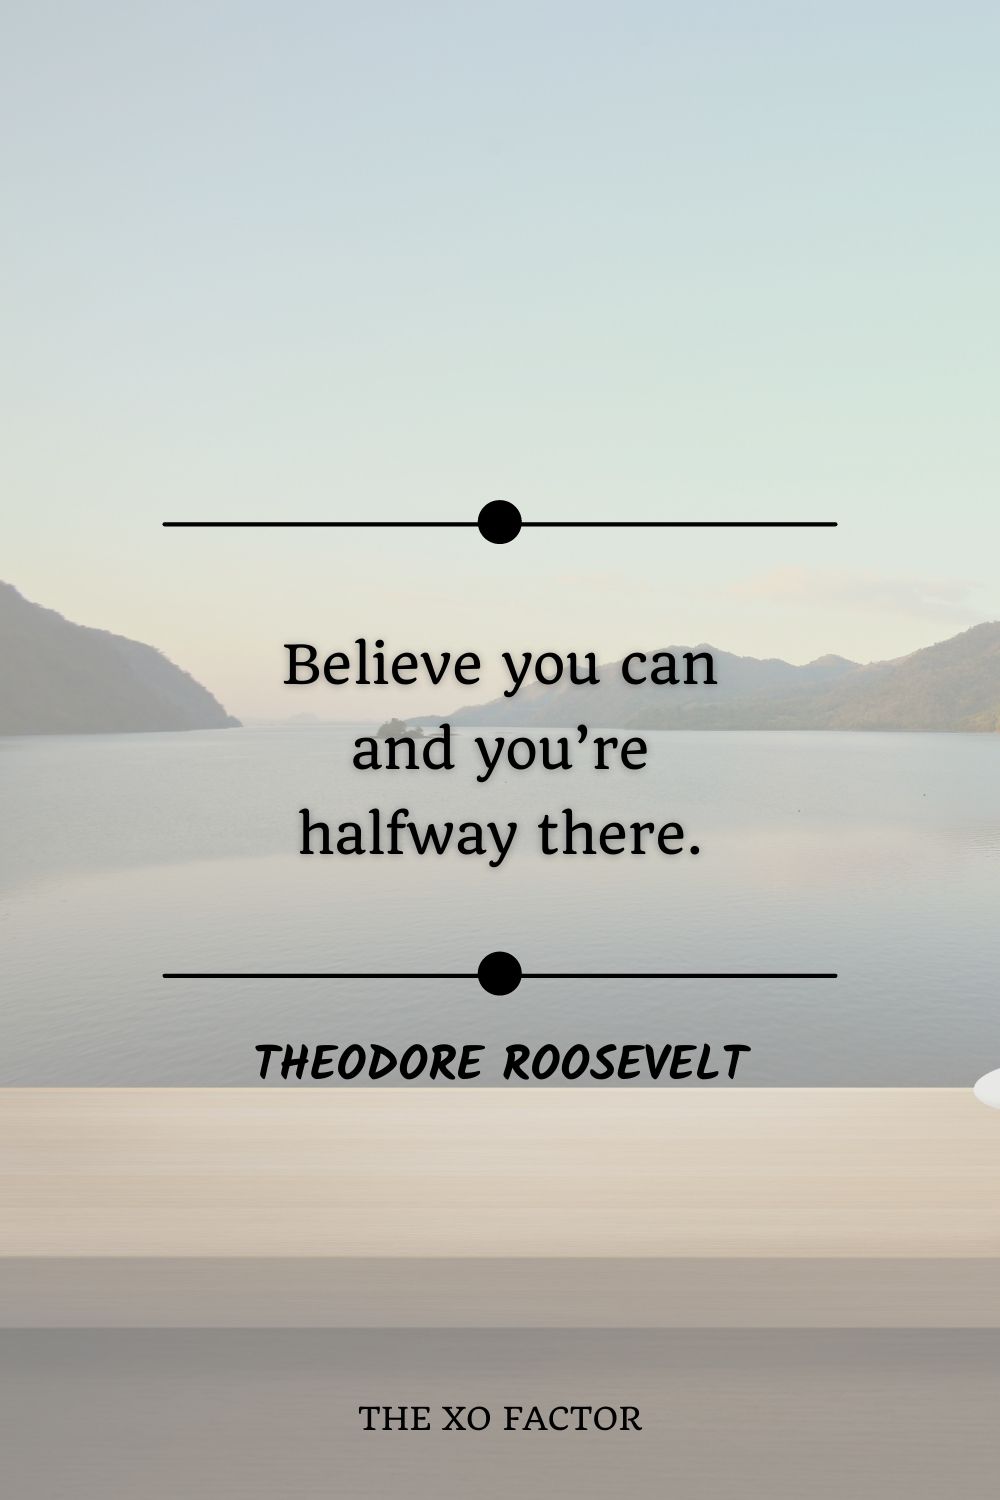 Believe you can and you’re halfway there.” Theodore Roosevelt